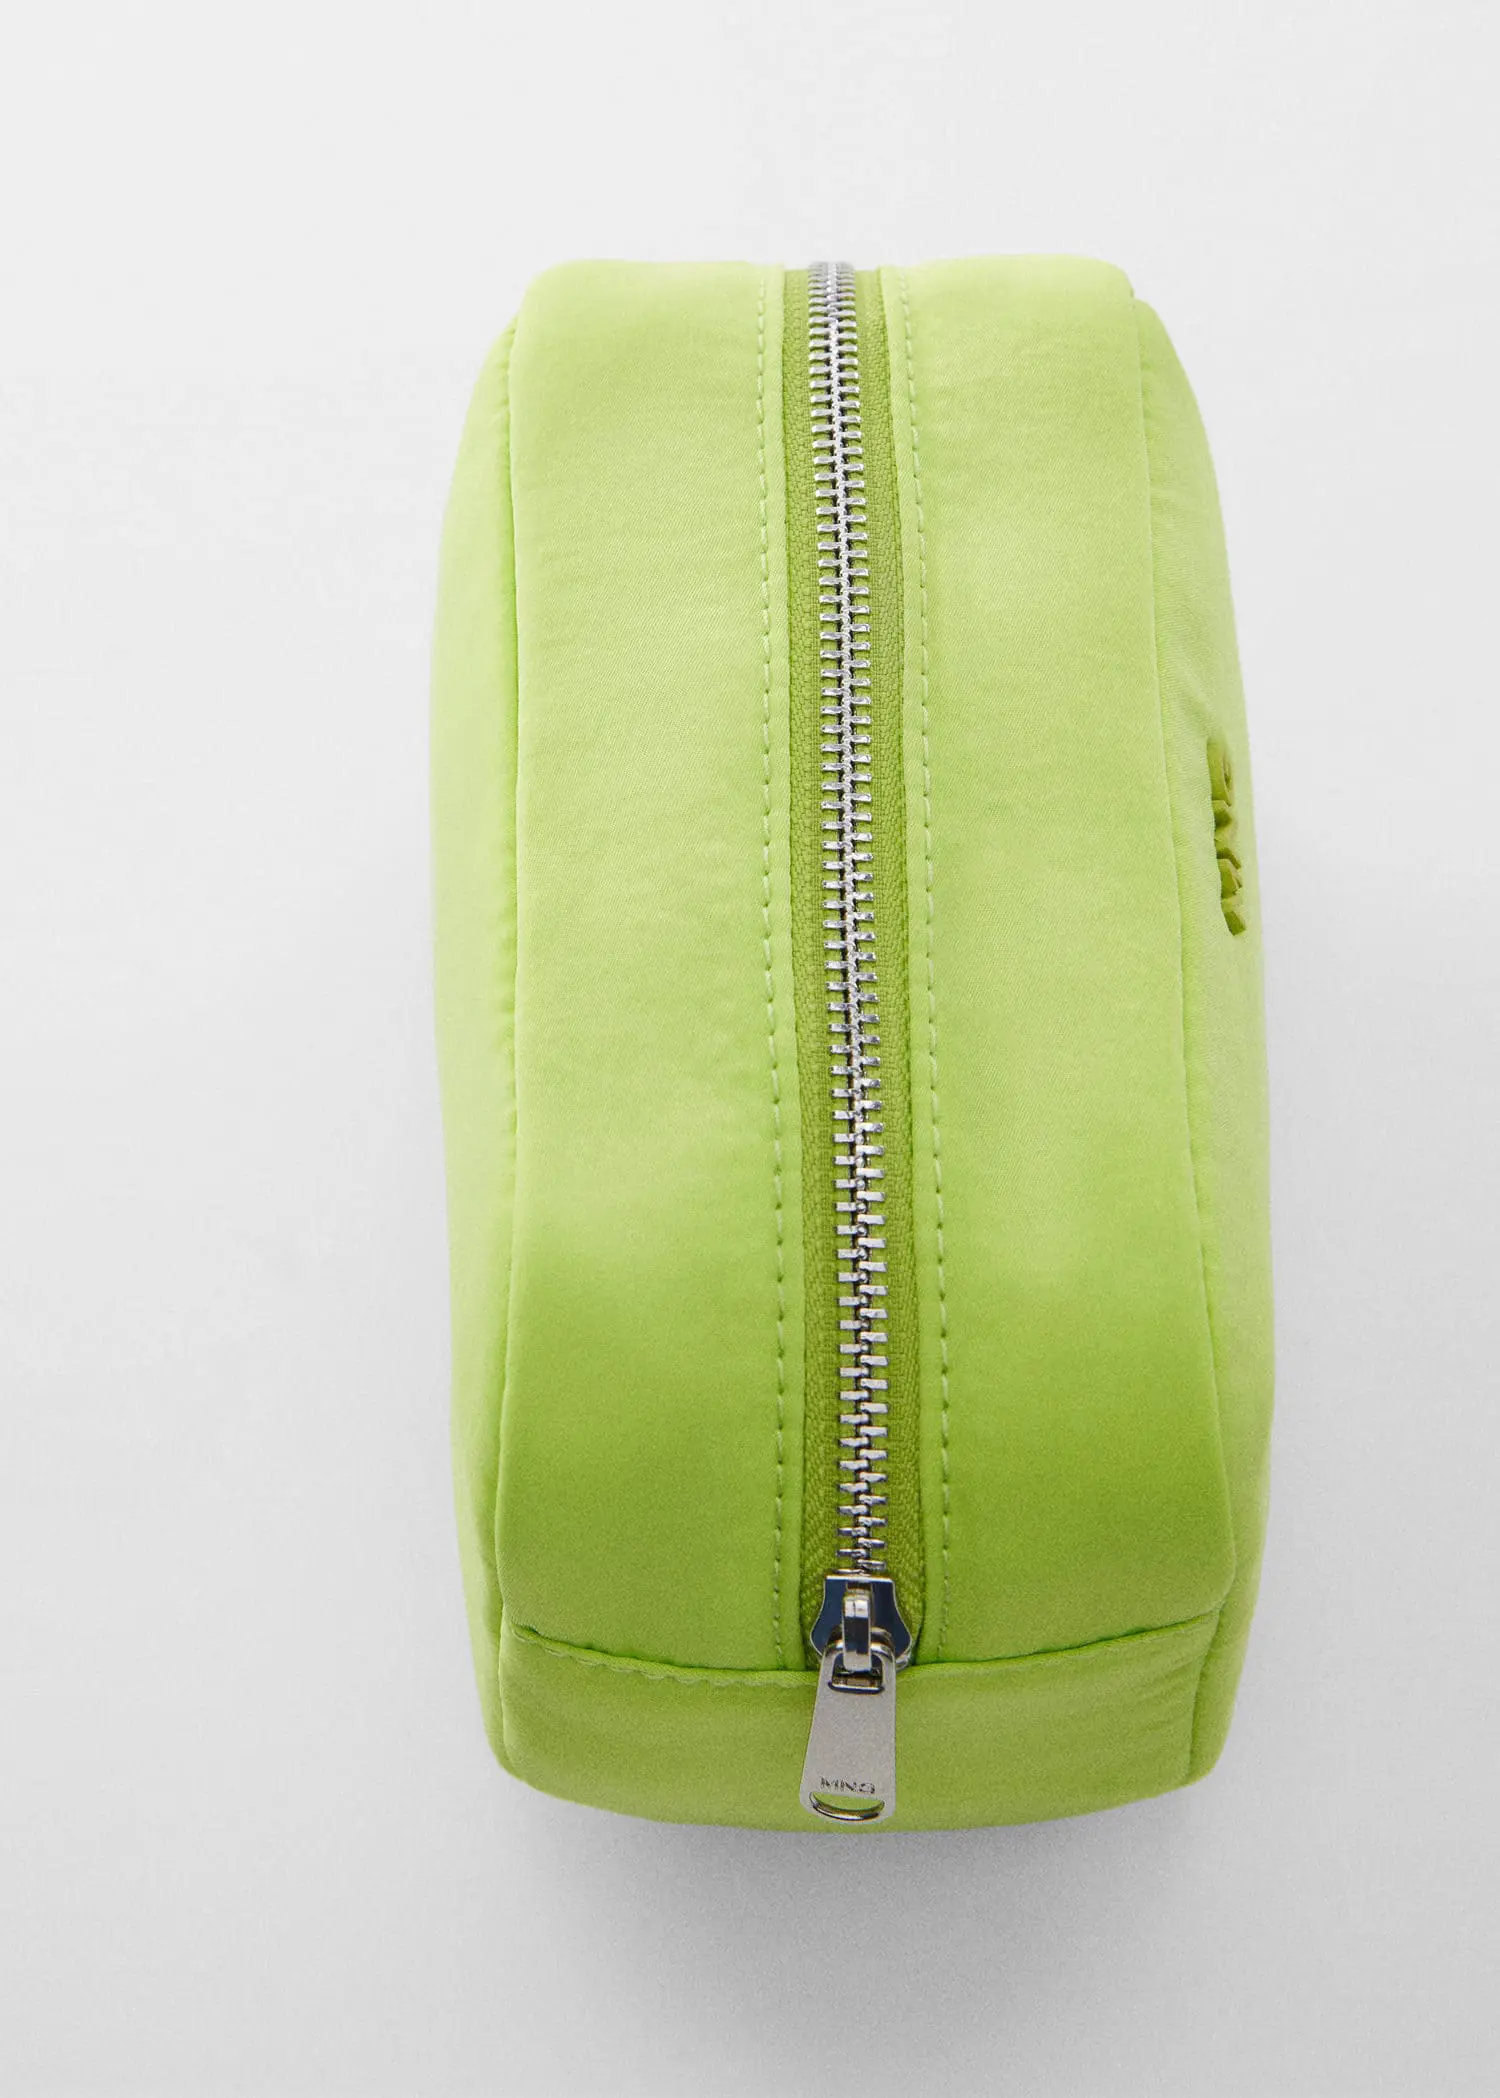 Mango Zipped toiletry bag with logo. a lime green bag with a silver zippered closure. 